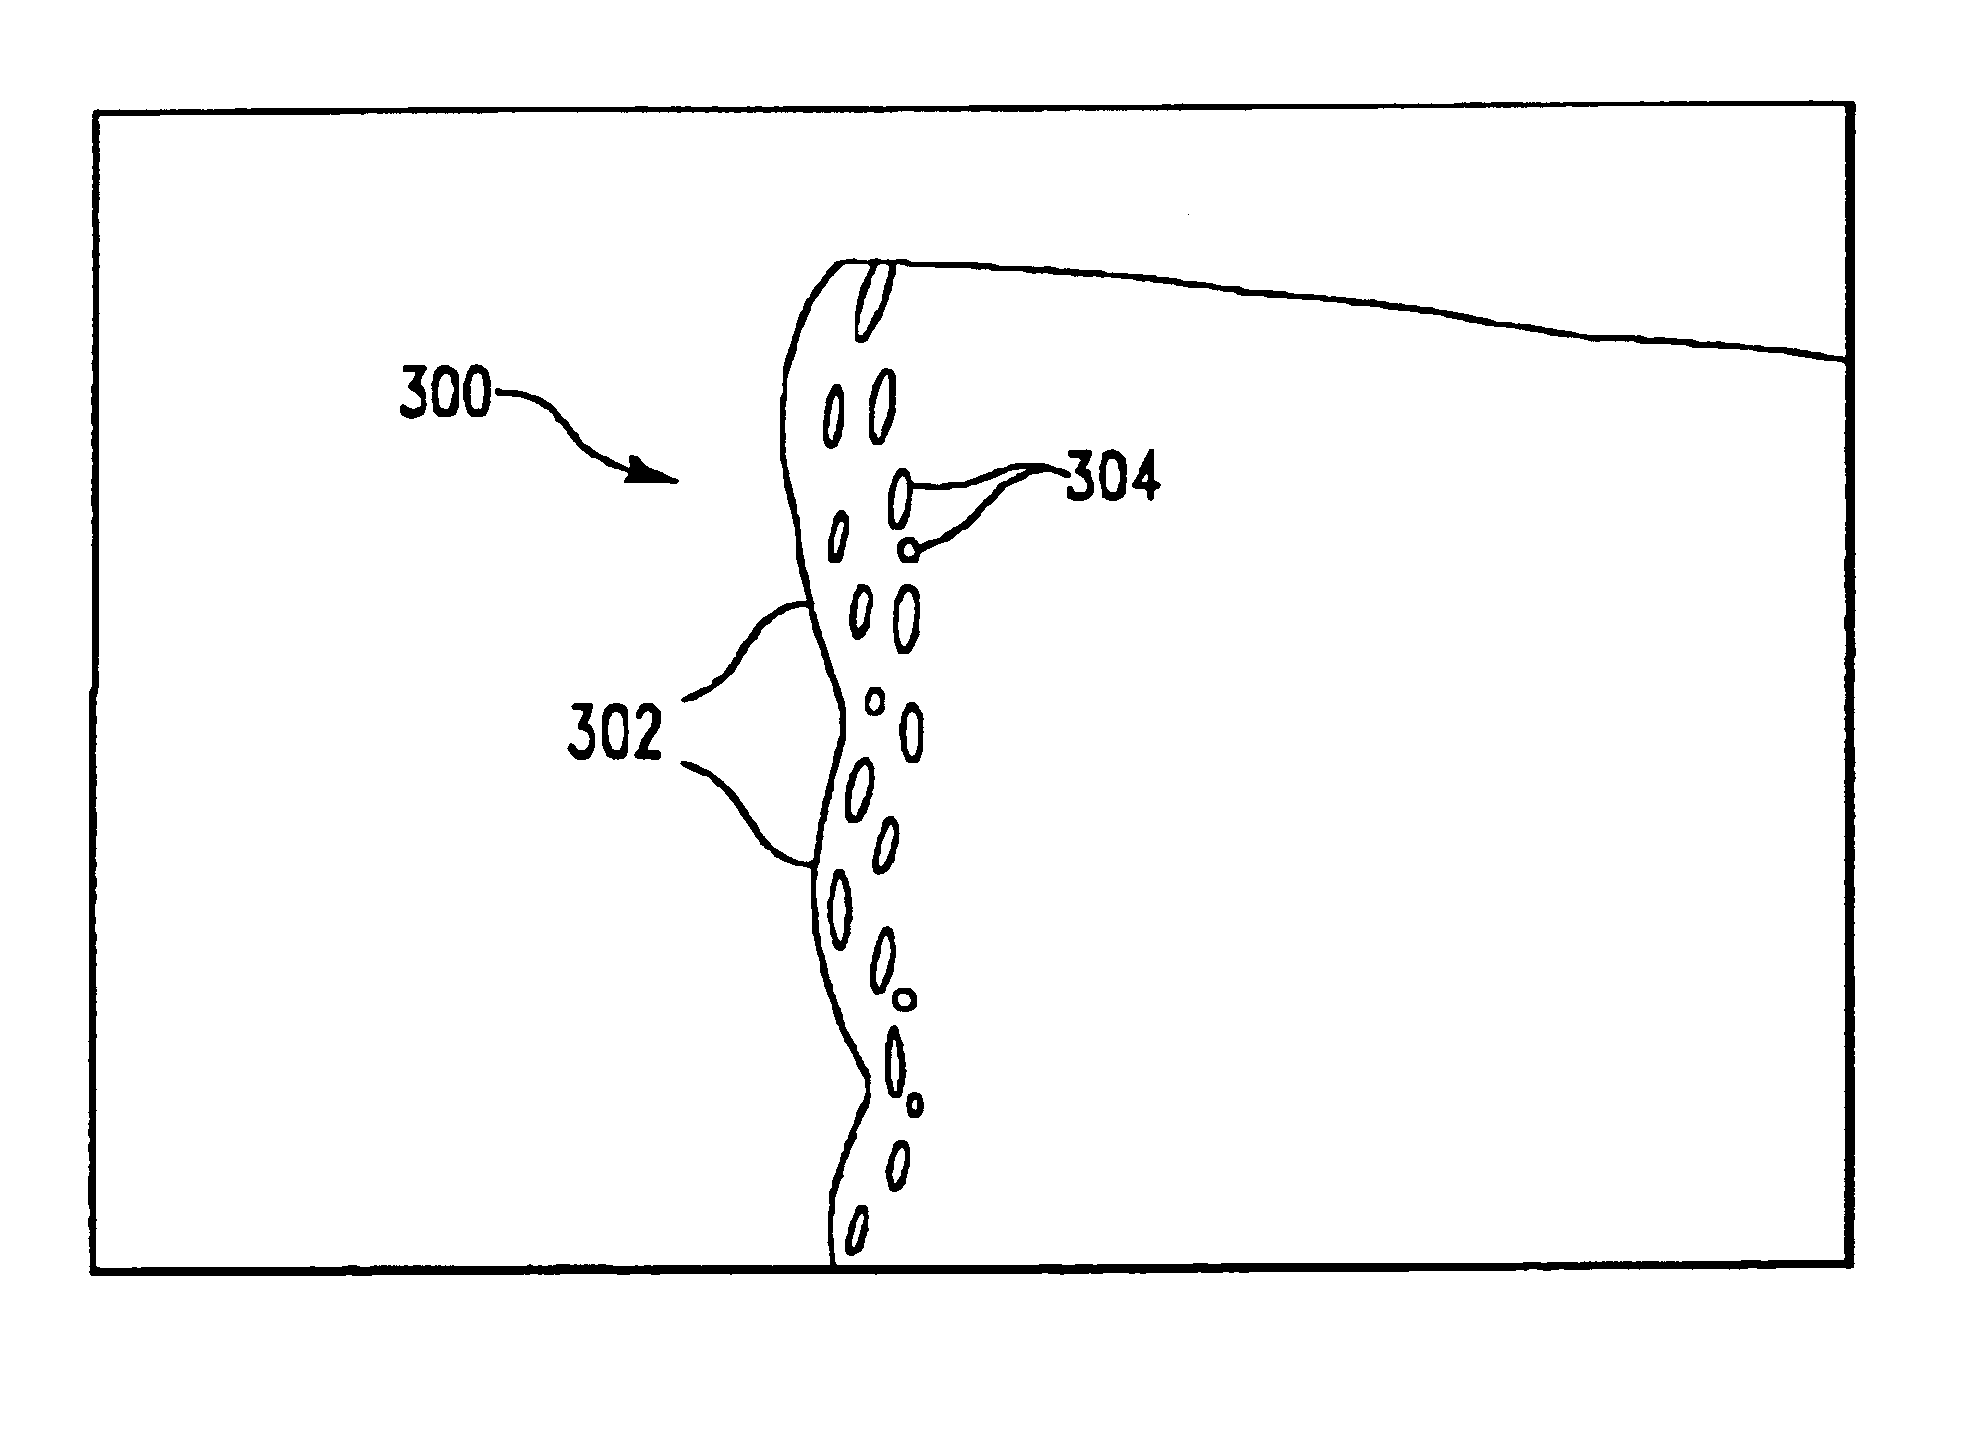 Method of smoothing a trench sidewall after a deep trench silicon etch process